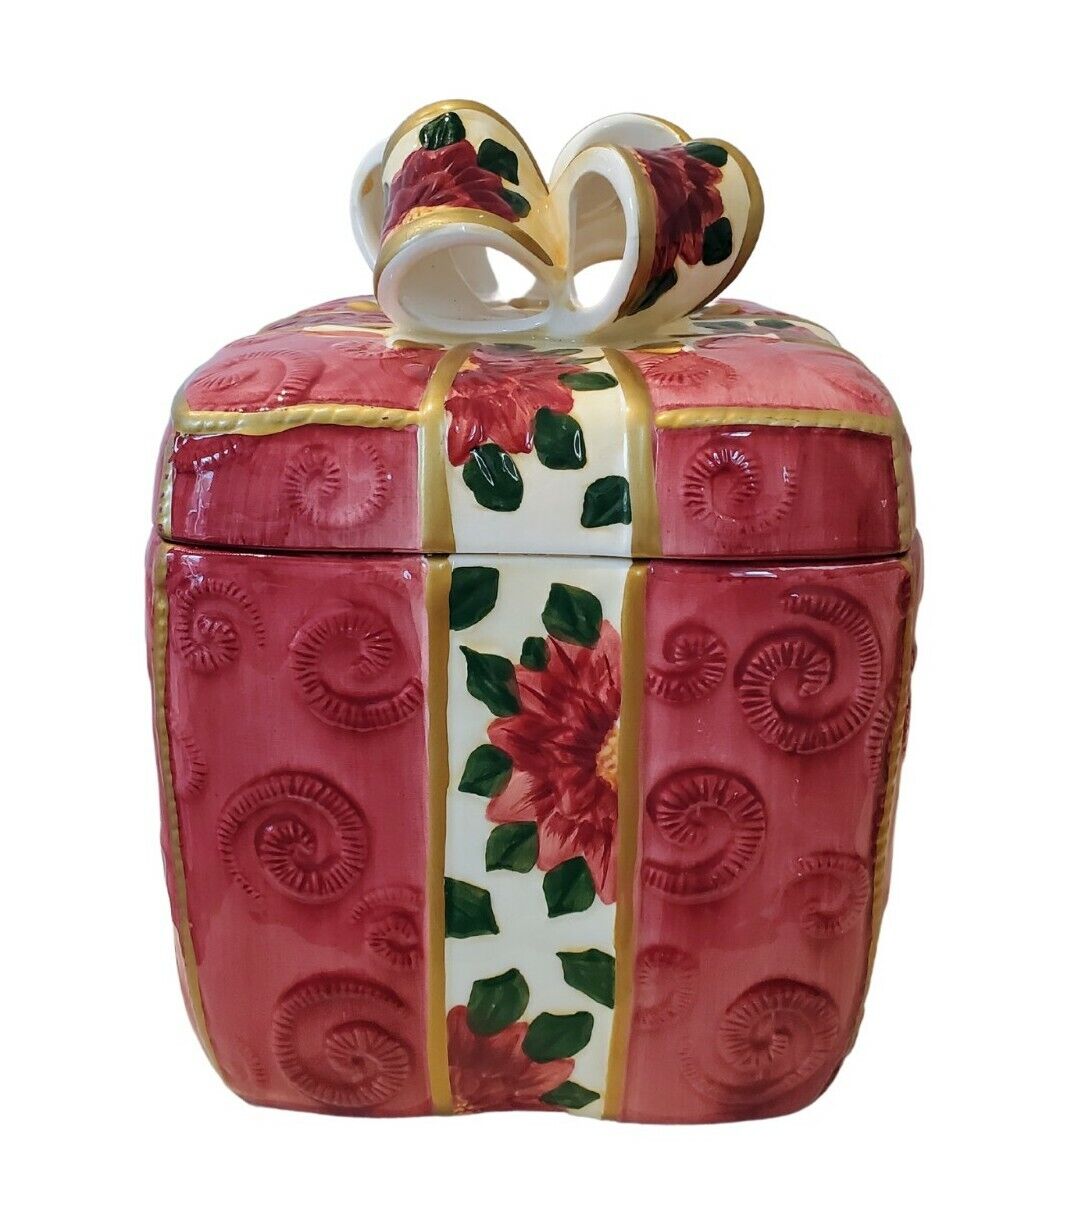 World Bazaars Christmas Red/Gold Poinsettia Gift With Bow Ceramic Cookie Jar 9